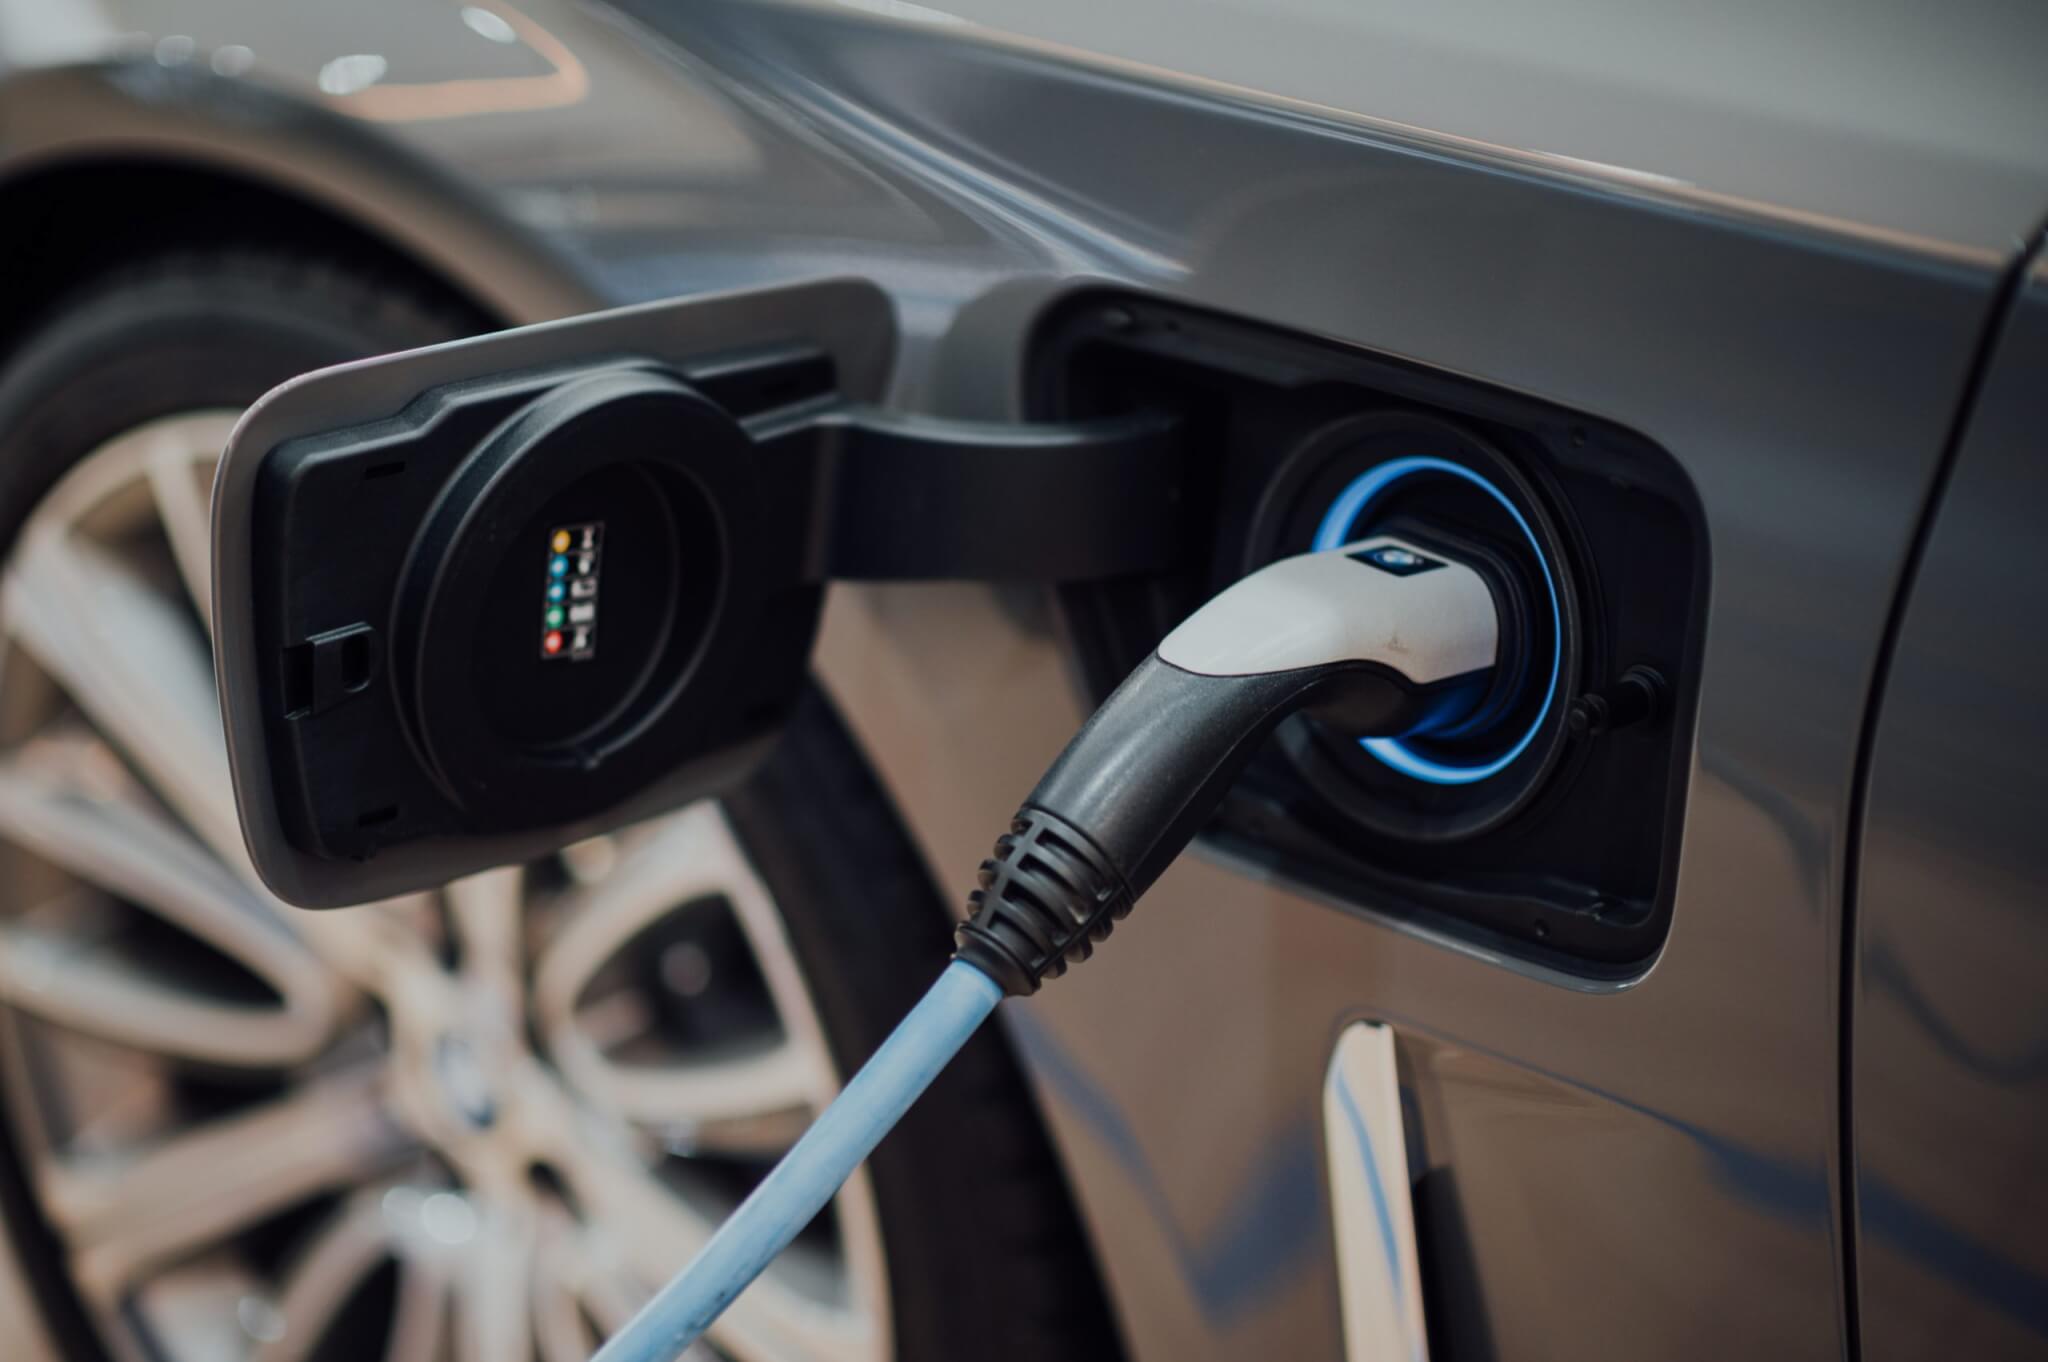 Electric cars charge at night and make the US power grid unstable